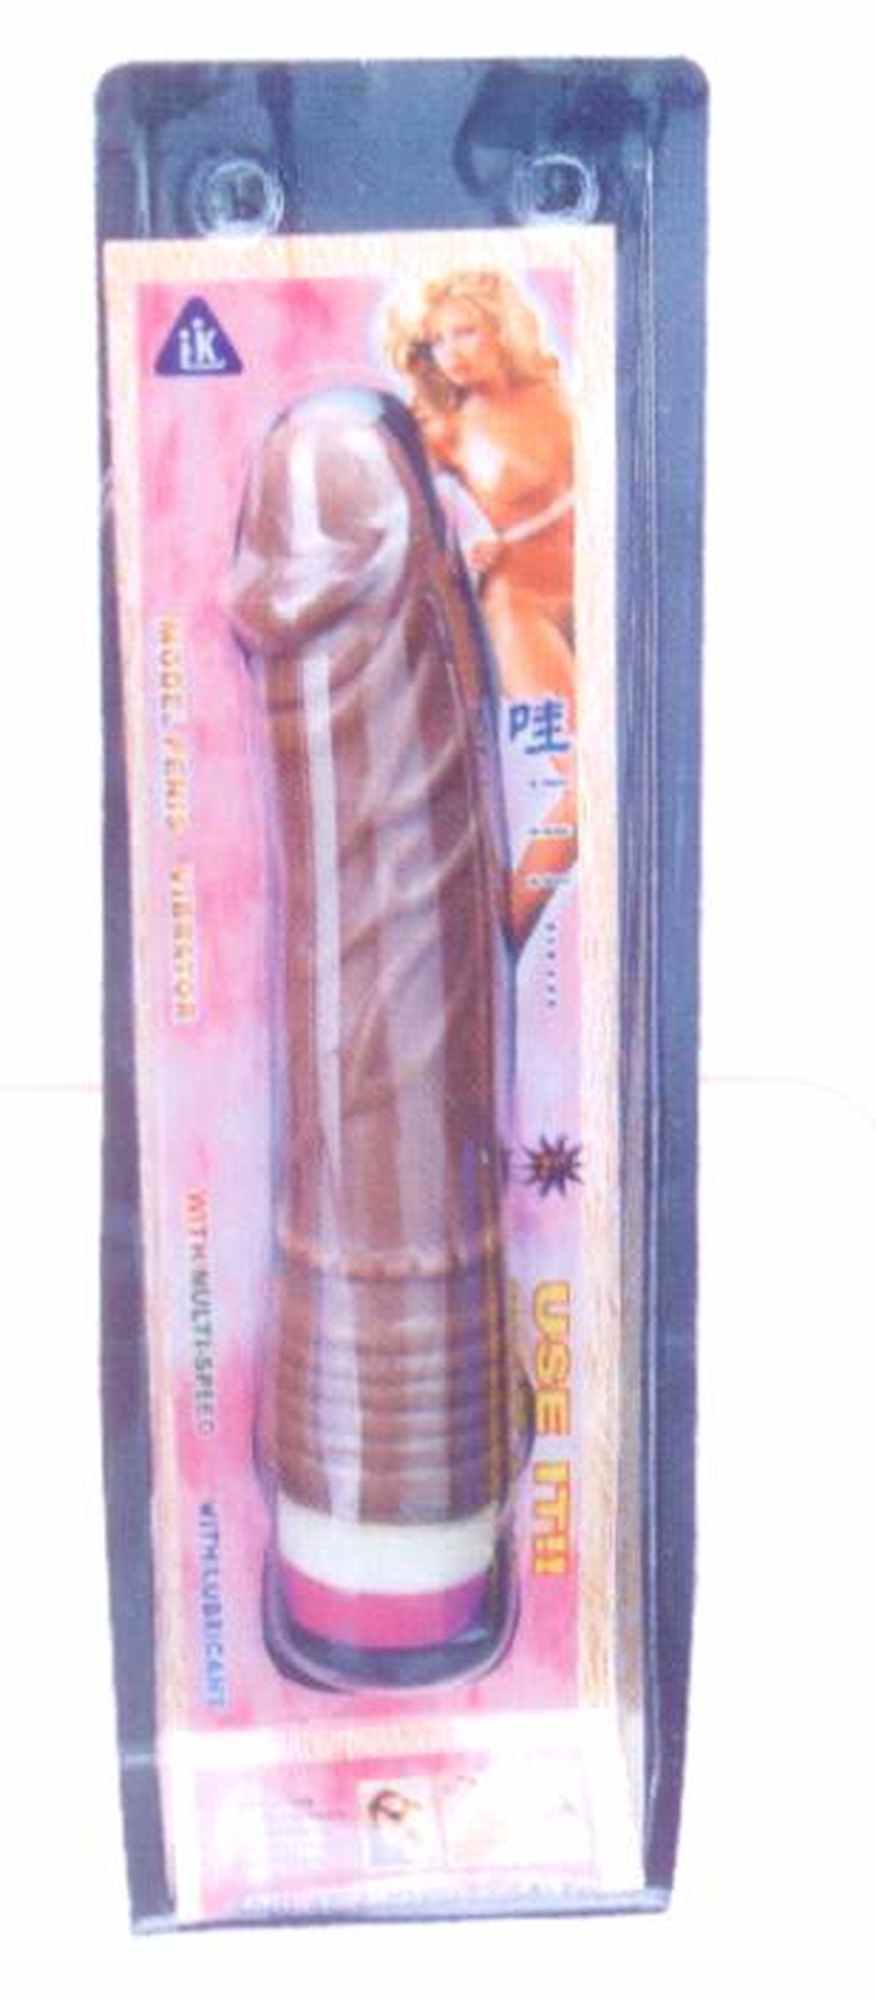 Big Rotating Vibrator One Operation Way Sex Toy (HY-0076)